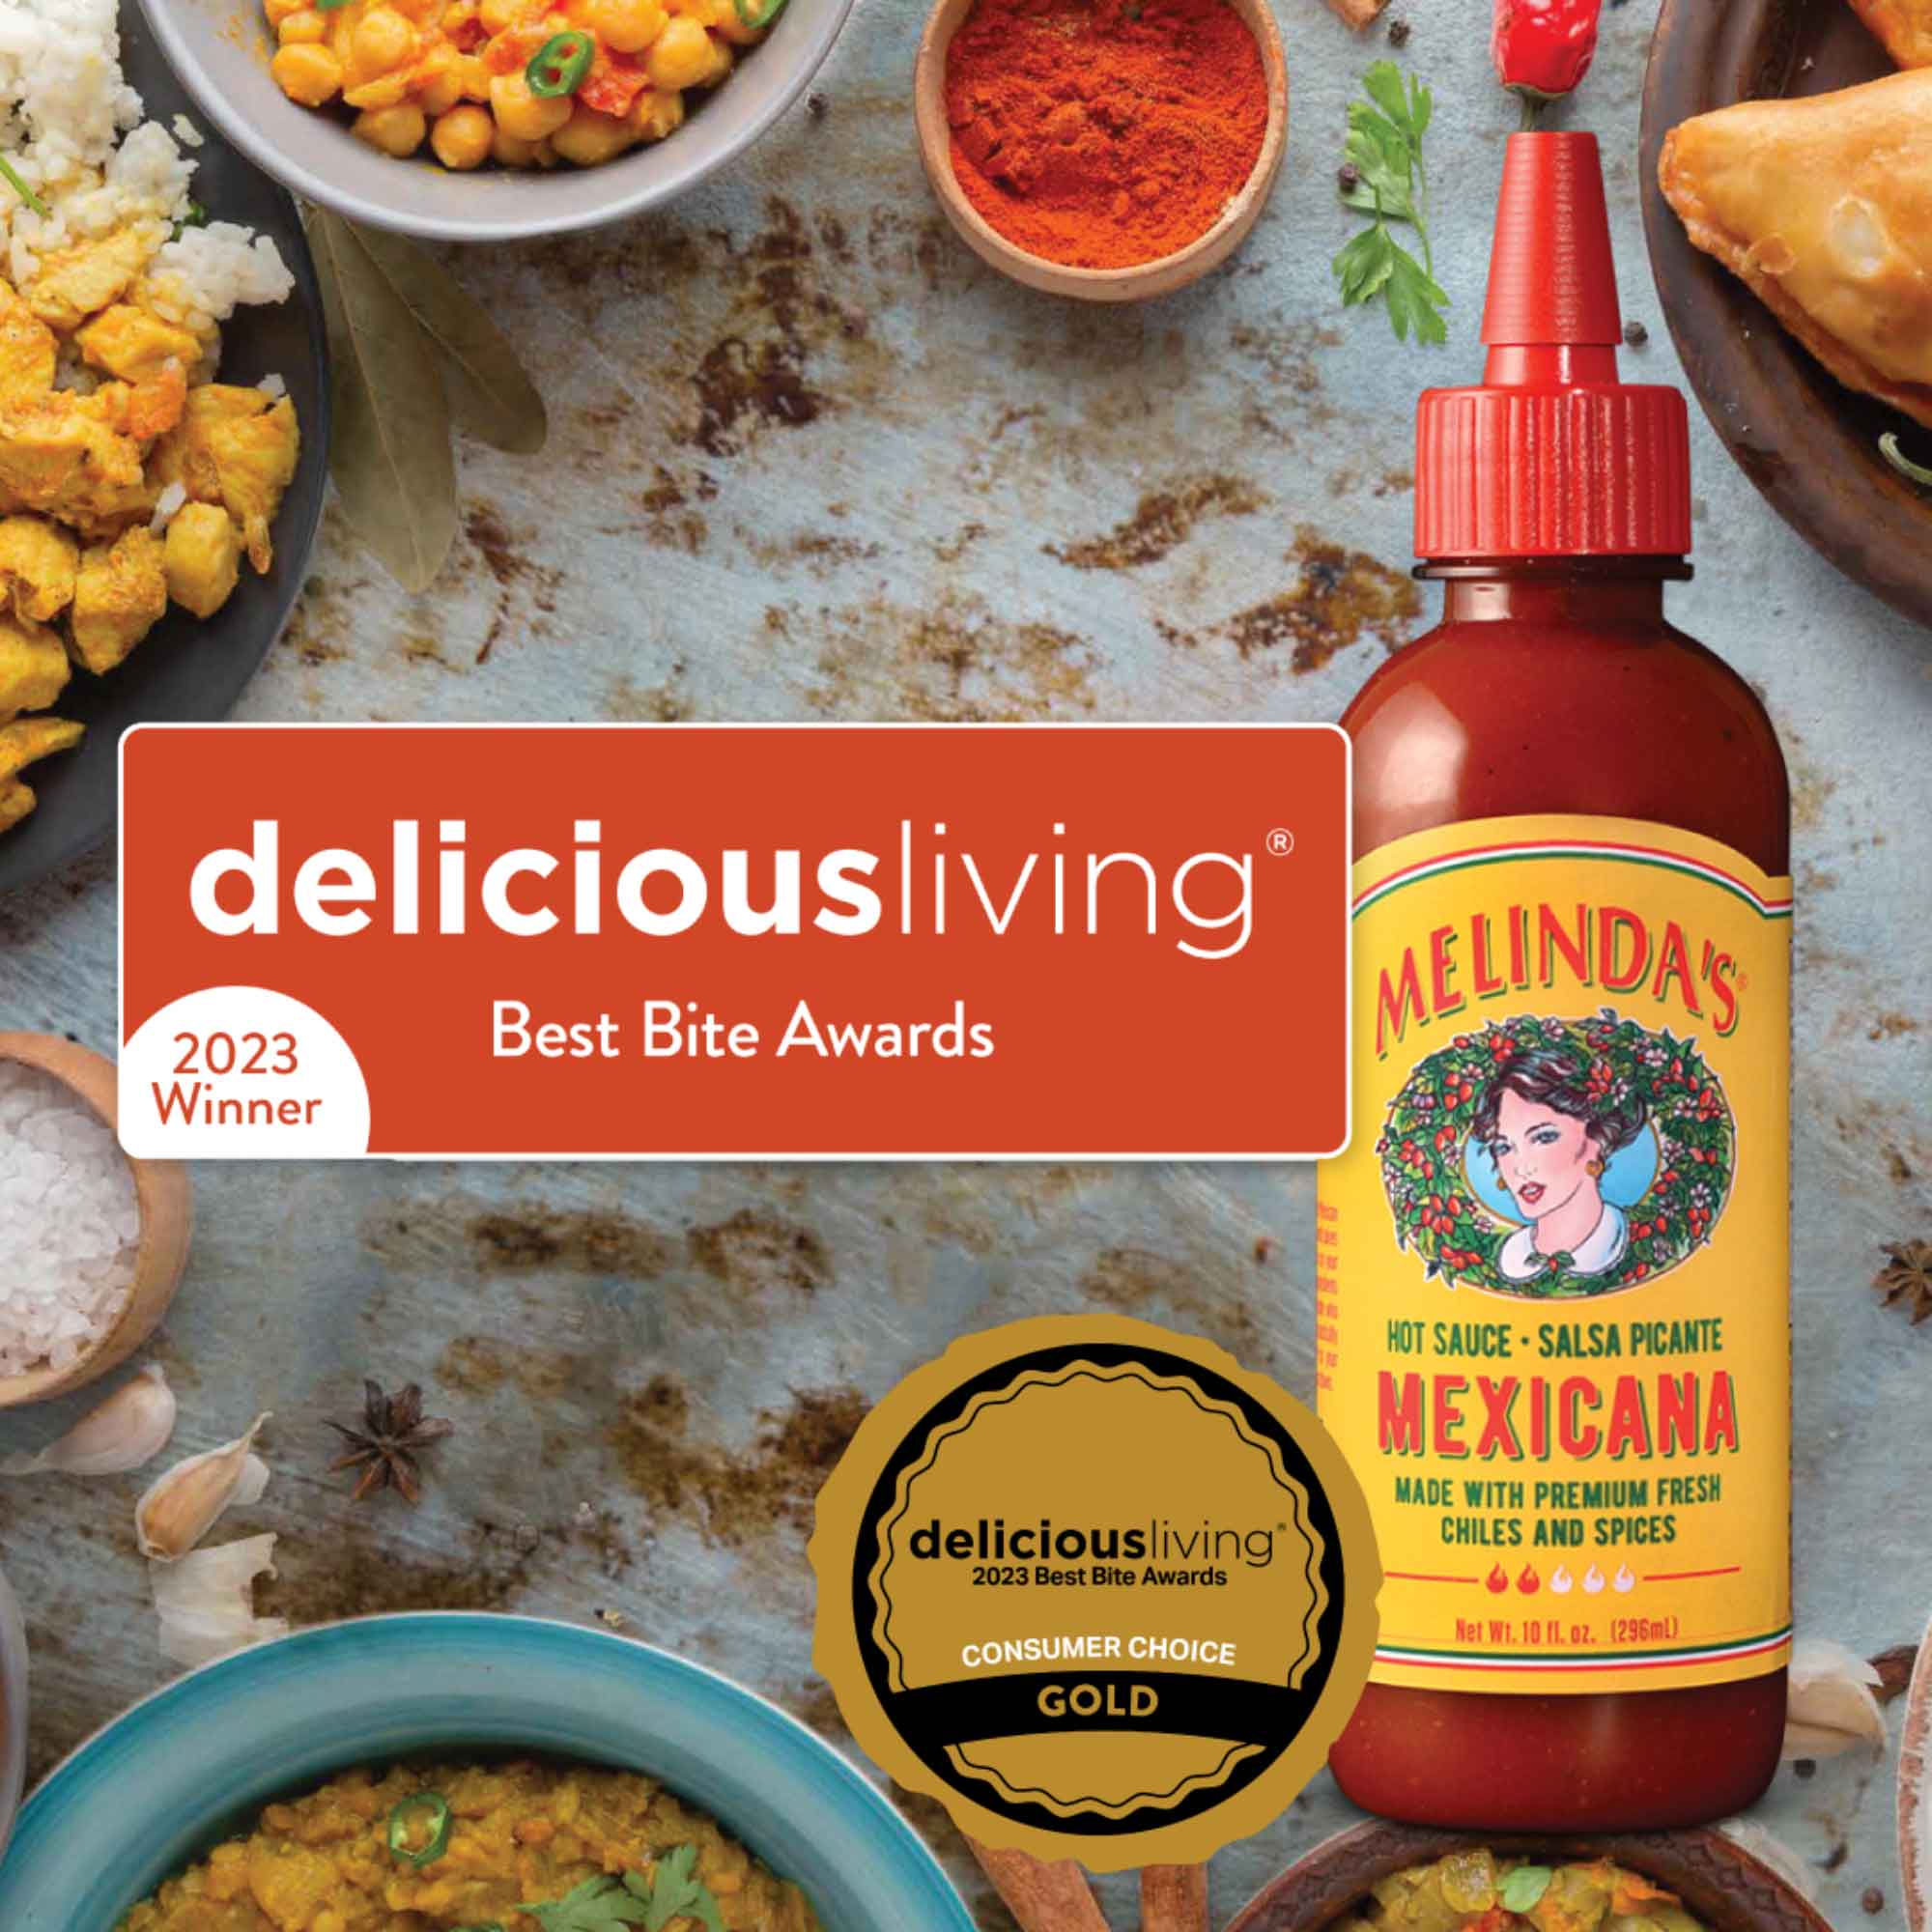 Delicious Living - Best Bite Awards 2023 selects Melinda's Mexicana as winner!!!